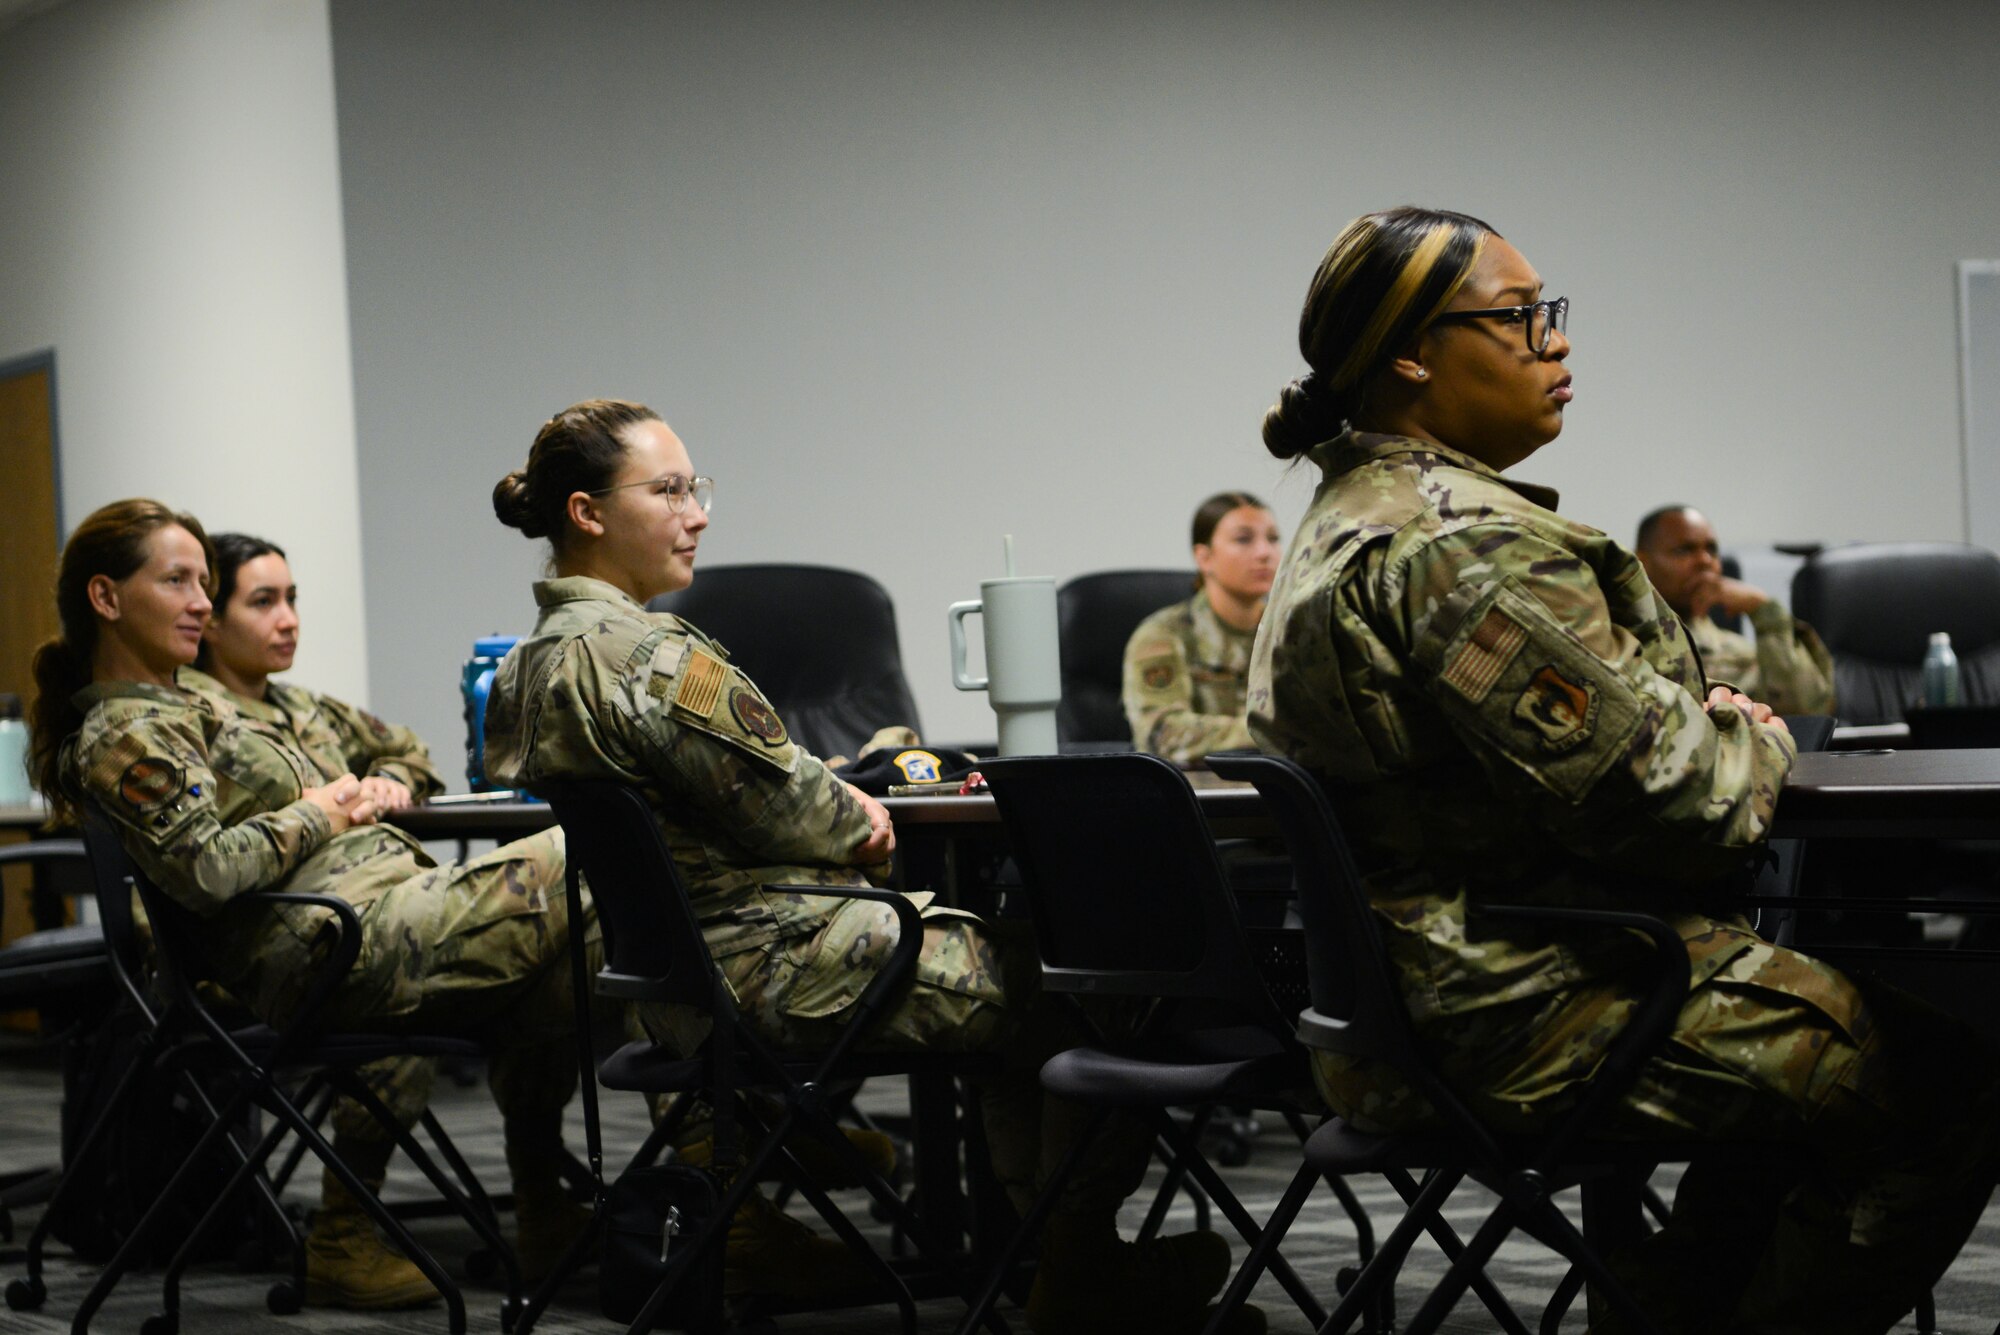 Minot Airmen listen to speaker Lt. Col. Fany
Colon de Hayes, 56th Force Support
Squadron commander, during the Air Force
Global Strike Command Women's Leadership
Symposium at Minot Air Force Base, North
Dakota, July 25, 2023. In order to reach more
Airmen the symposium consisted of an
interactive livestream and guest speakers
with messages focused on leading boldly.
(U.S. Air Force photo by Airman 1st Class
Alyssa Bankston)